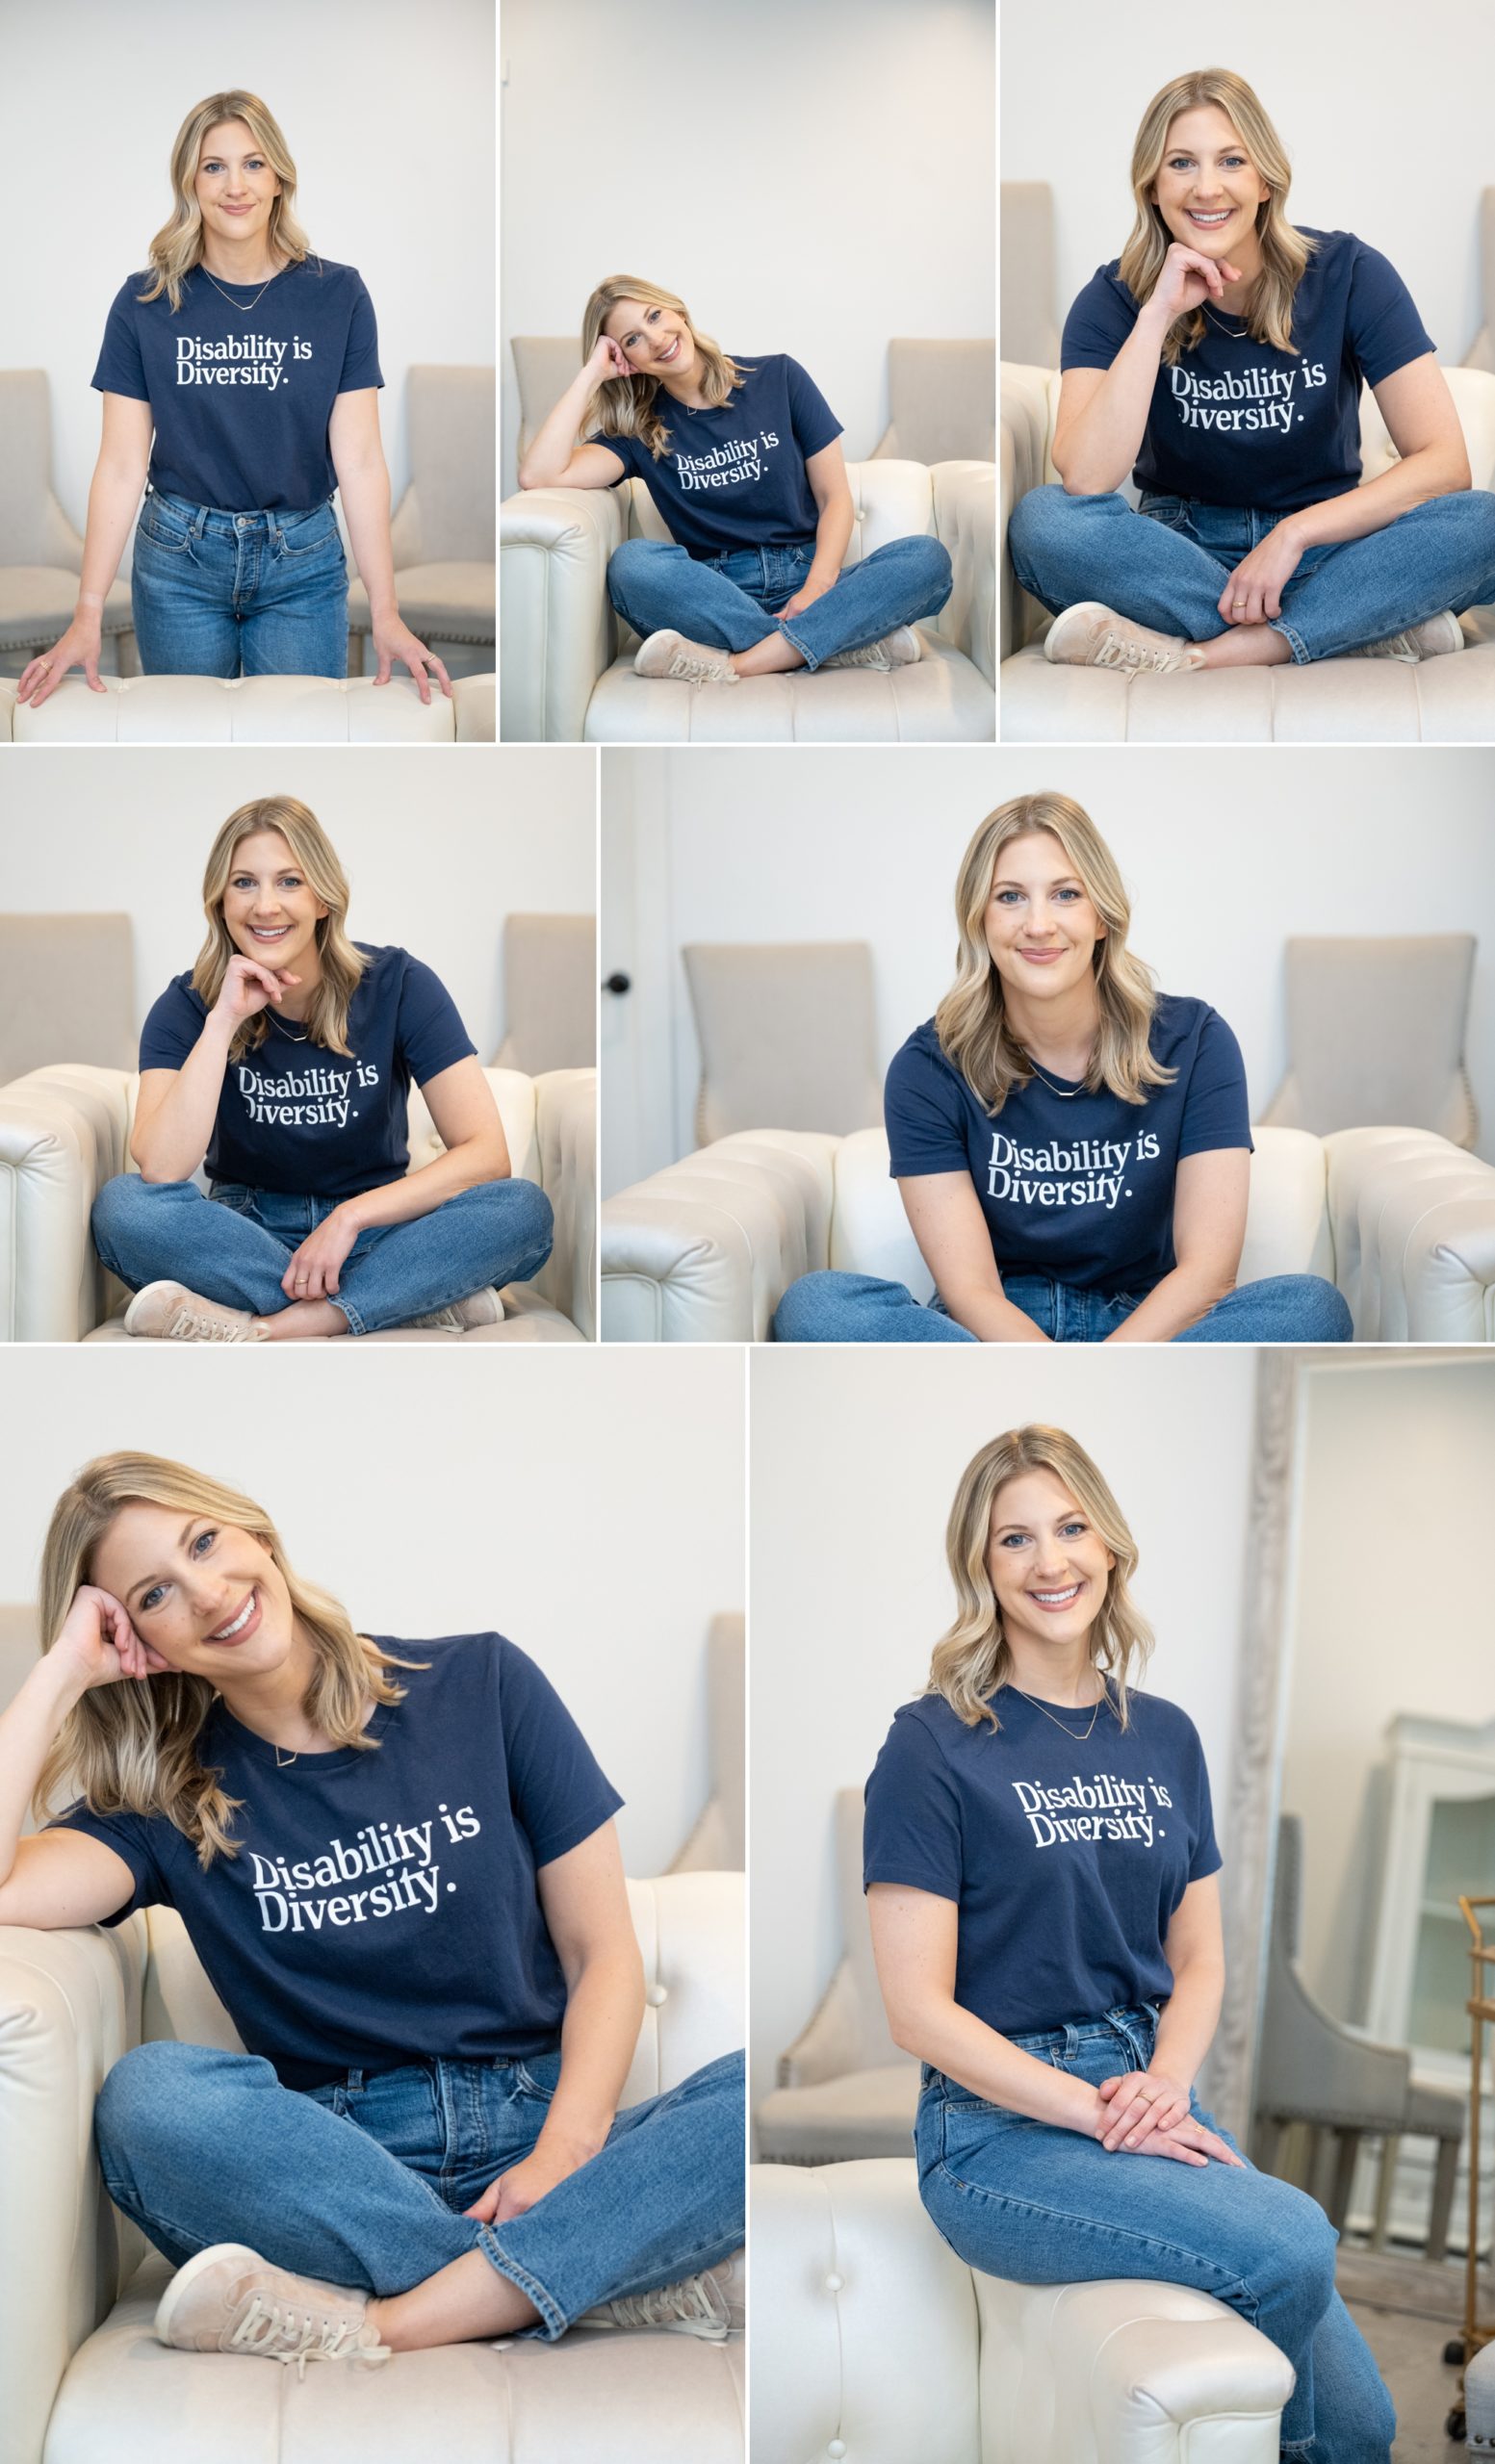 a collage of brand images featuring a woman with blonde hair wearing a navy t-shirt that says Disability is Diversity